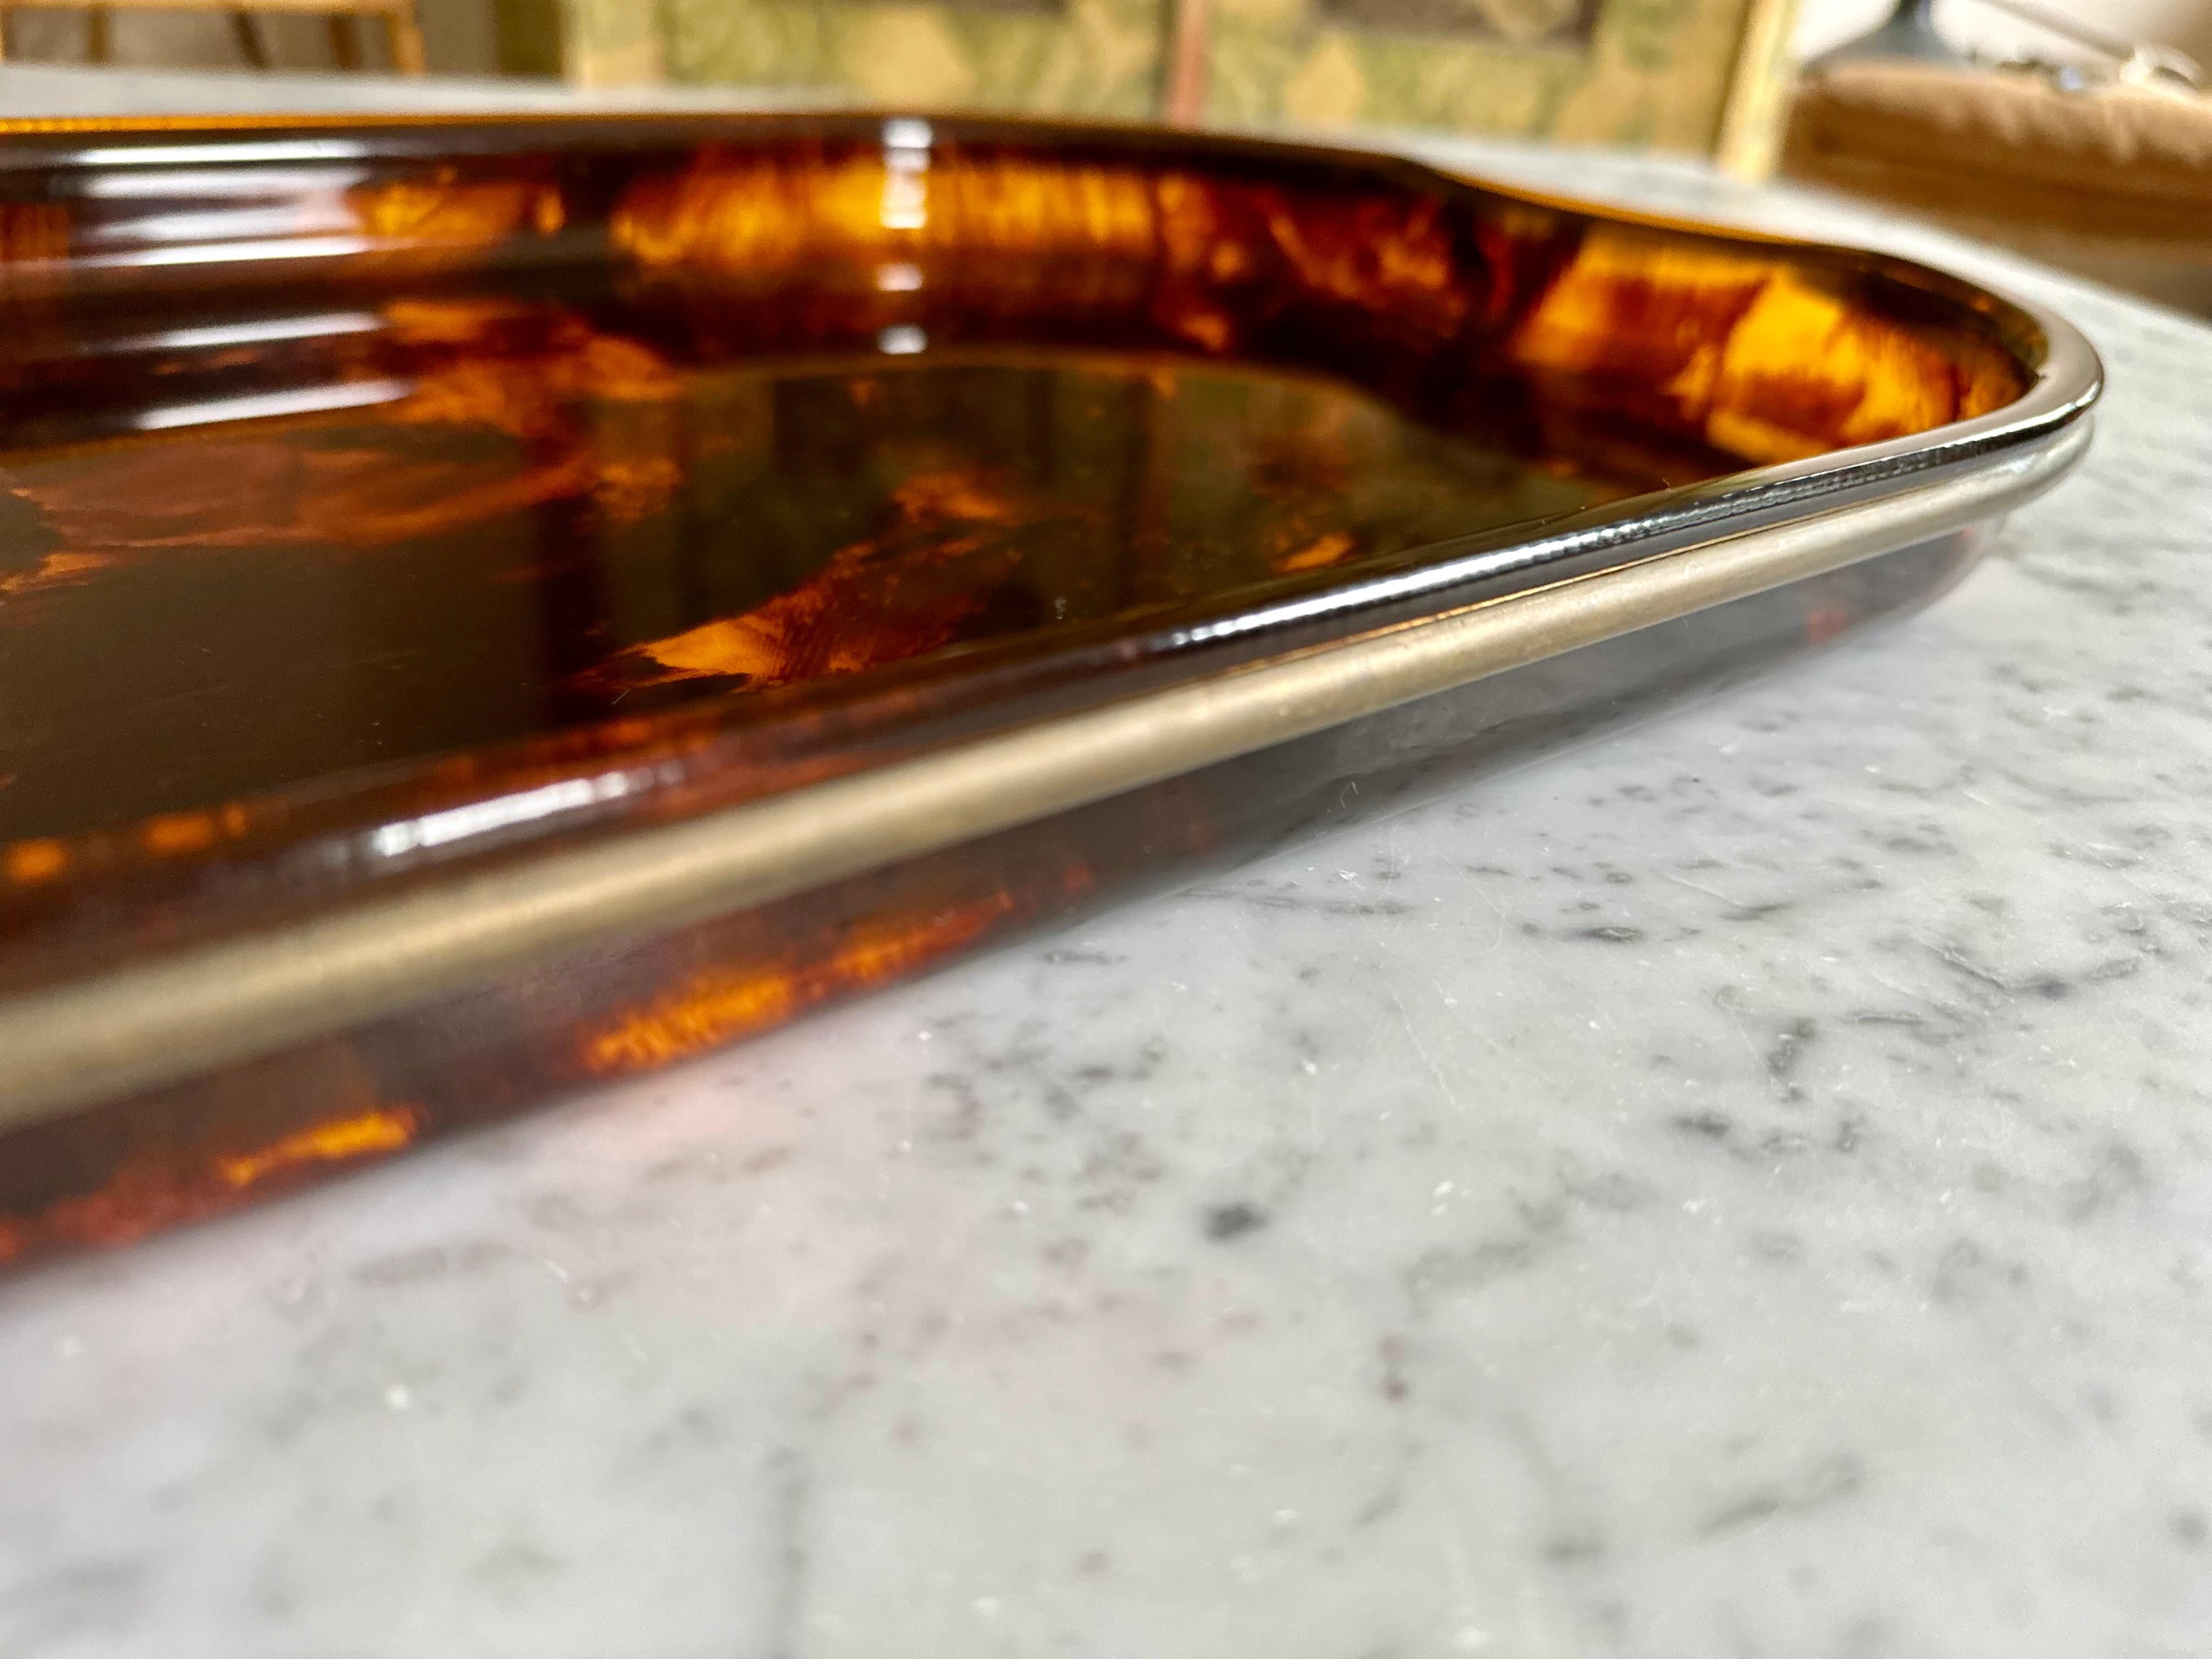 20th Century  Guzzini’s Oval Lucite Serving Tray from 1970s Italy – Faux Tortoiseshell -brass For Sale